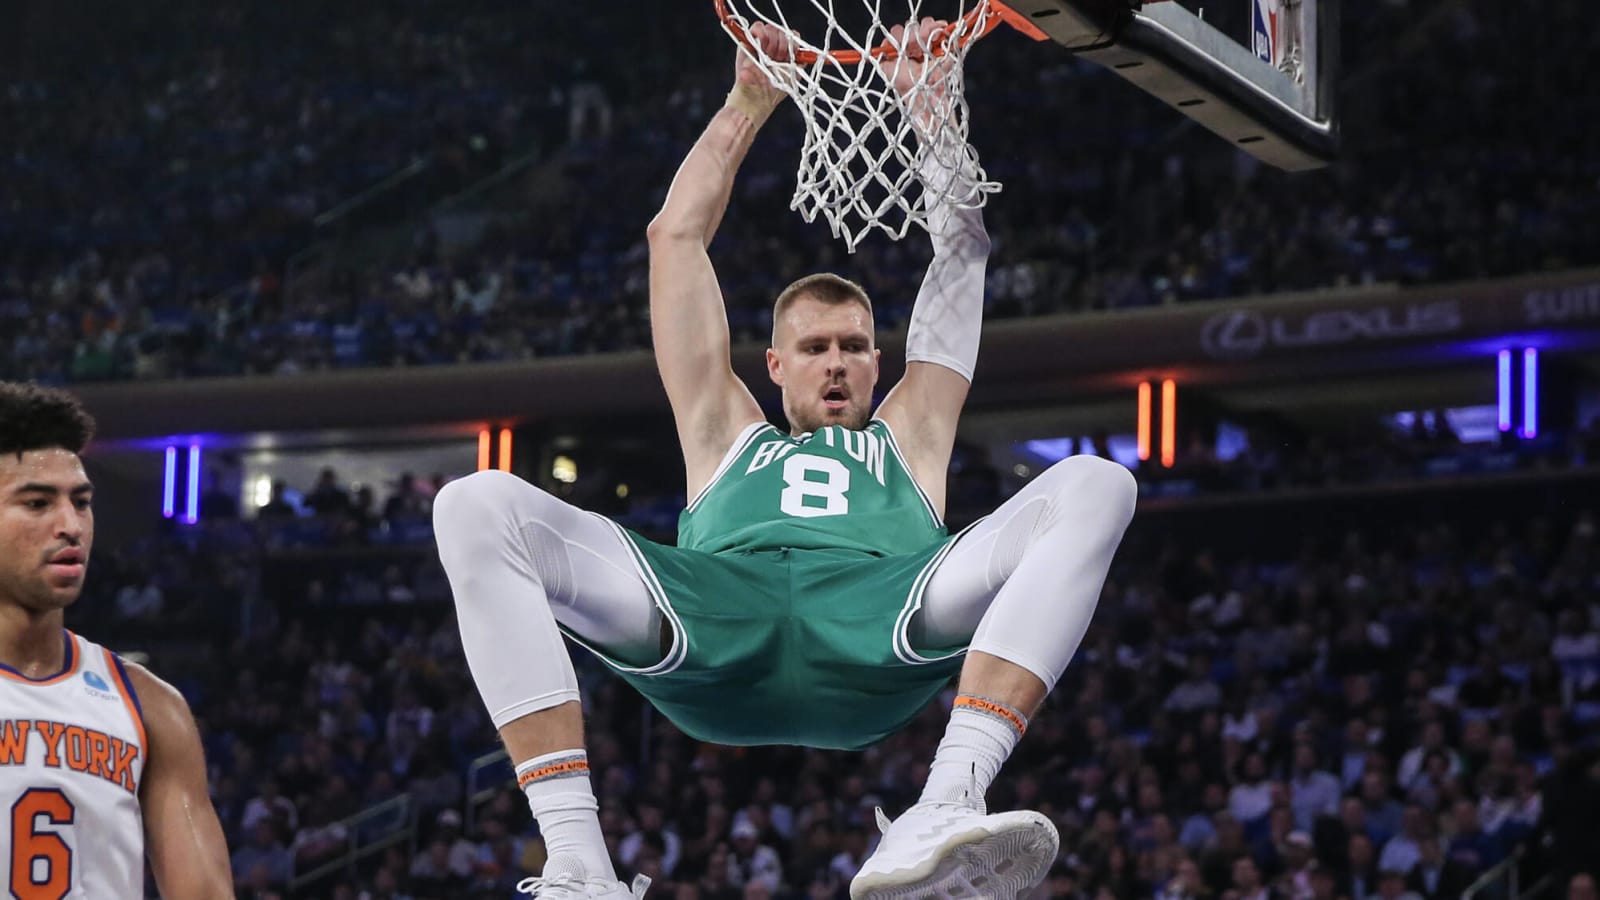 Kristaps Porzingis was motivated by vulgar chant from Knicks fans